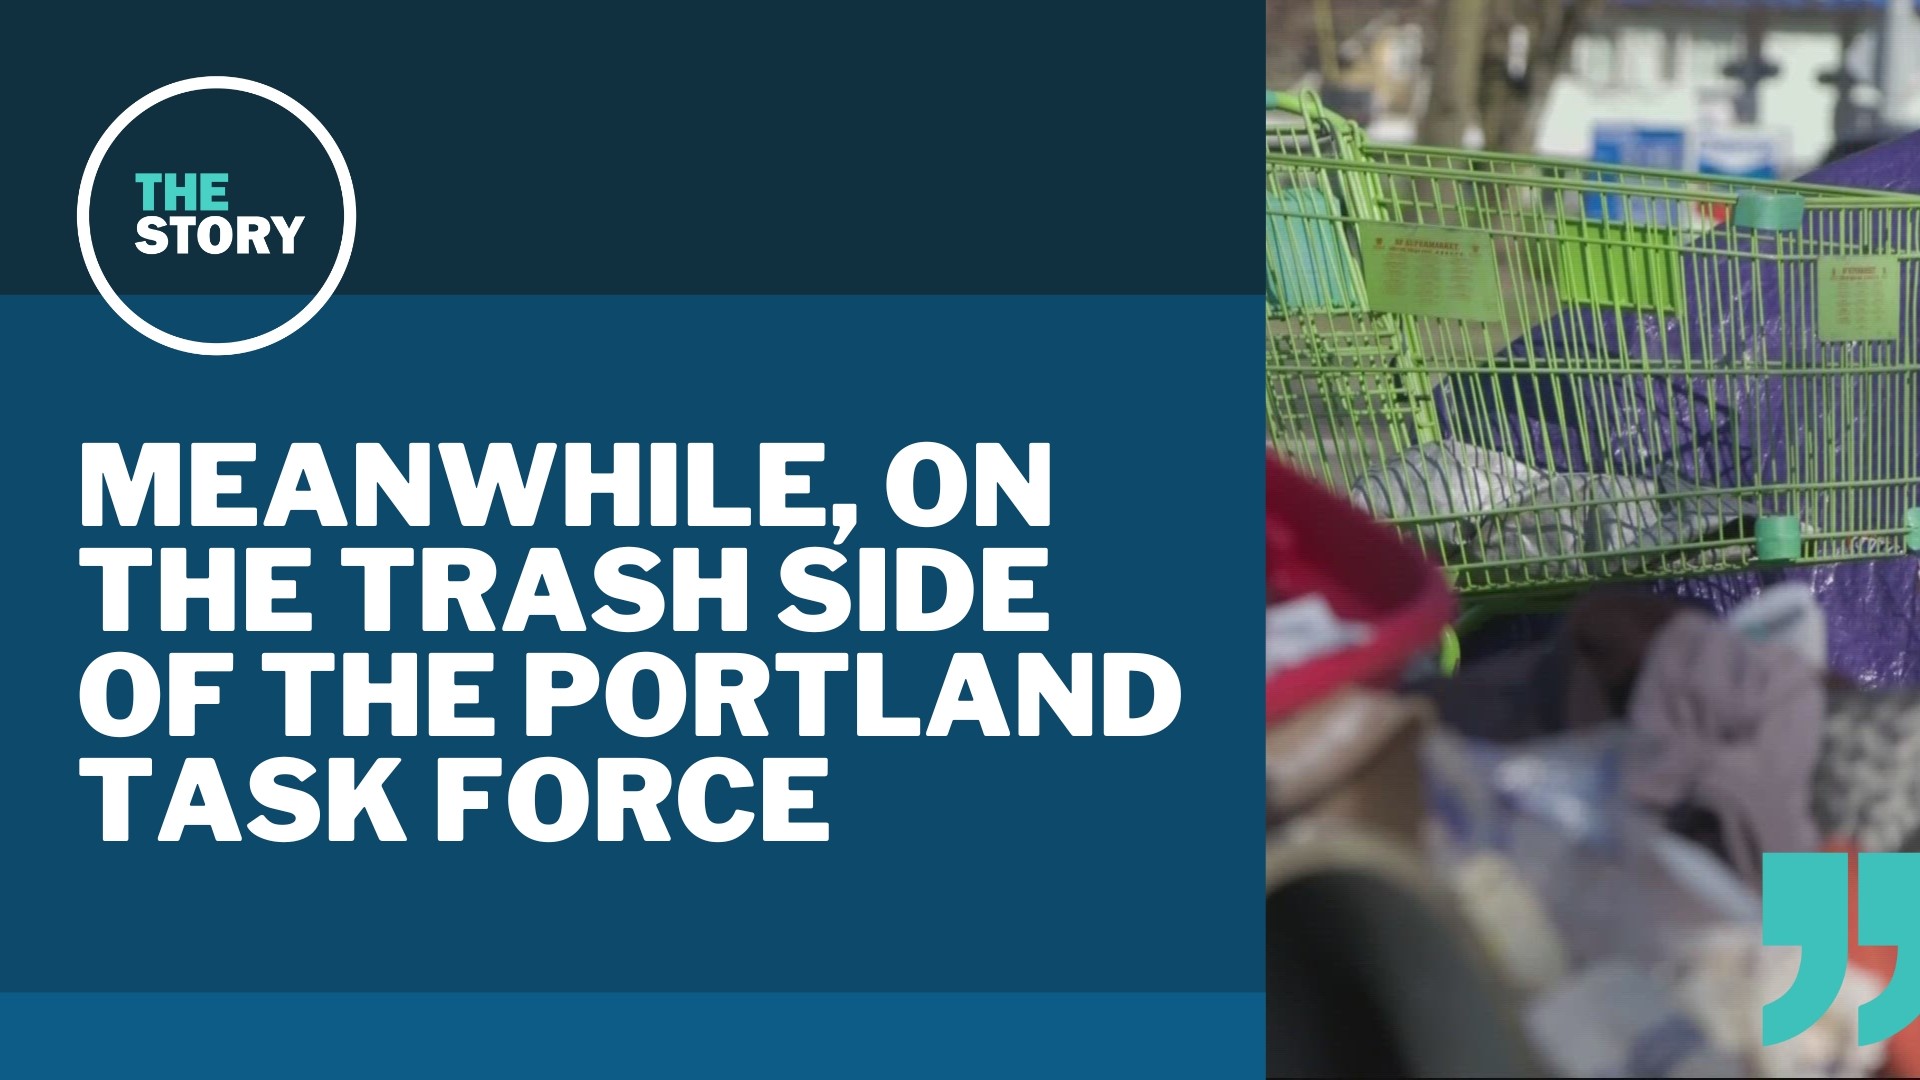 While the Portland Central City Task Force's deliberations have been mostly opaque, insiders on one of the committees say they're looking at how to handle garbage.